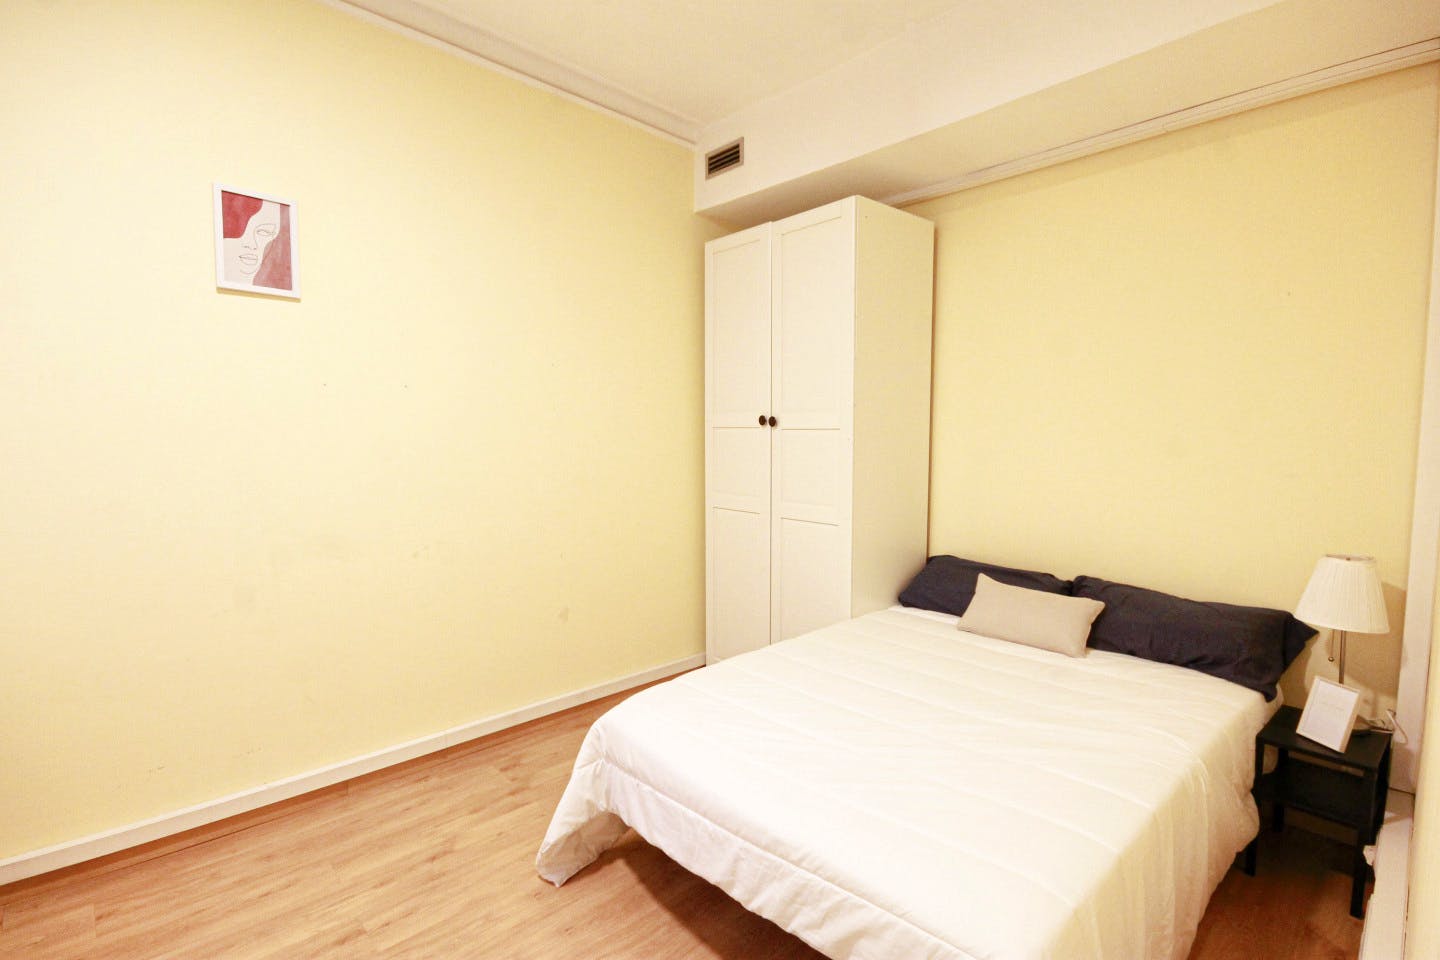 Brilliant apartment nearby the Hospital Clínic Metro Station